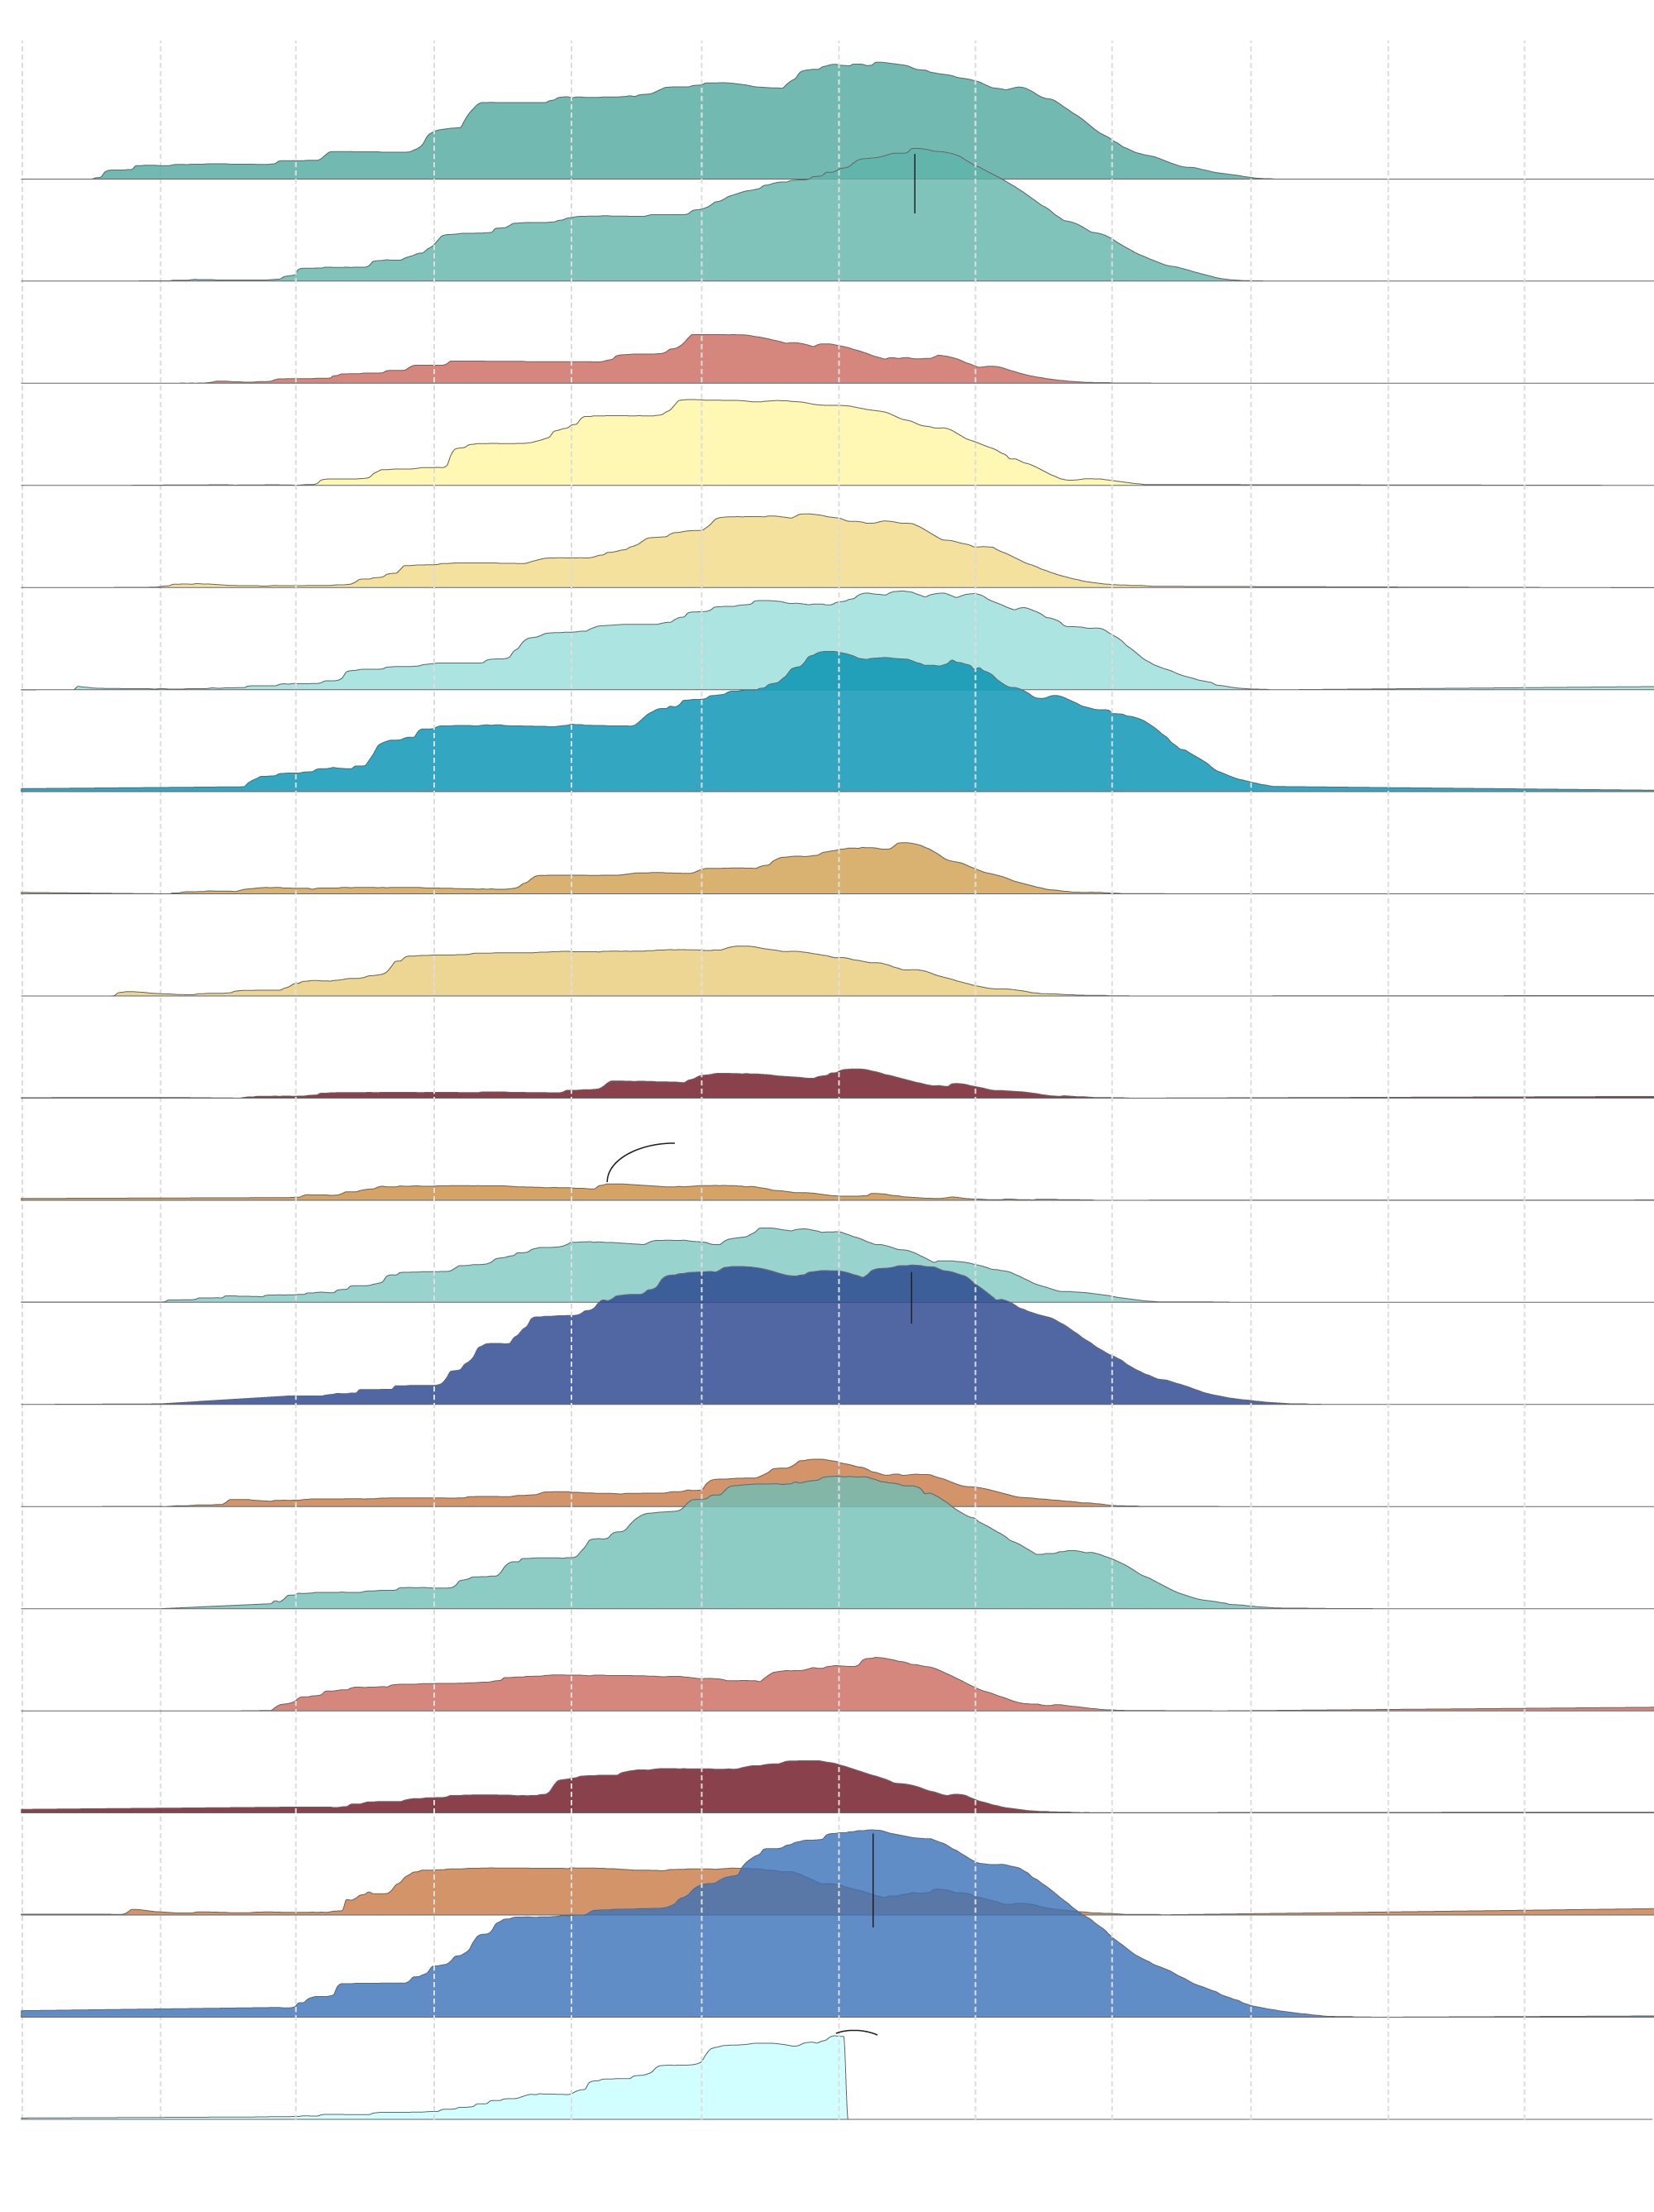 This visualization stacks up 20 years of snowpack data. It shows how many long spells of drought are often broken by one or two very wet or average years with large snowpacks.